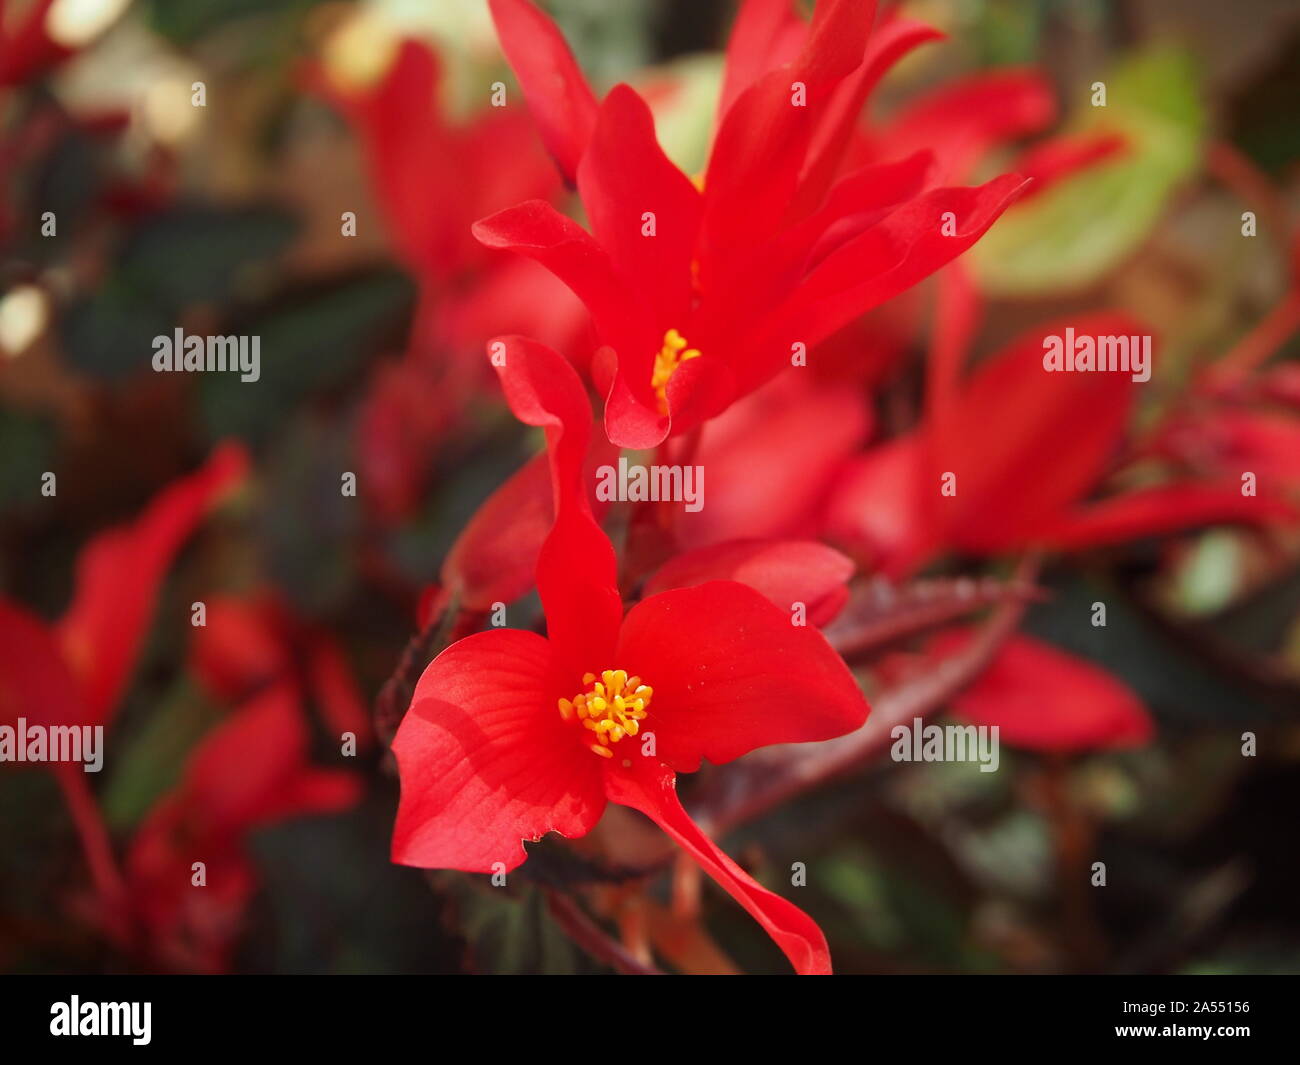 Red begonia flowers with yellow stamens, leaves in background Stock Photo